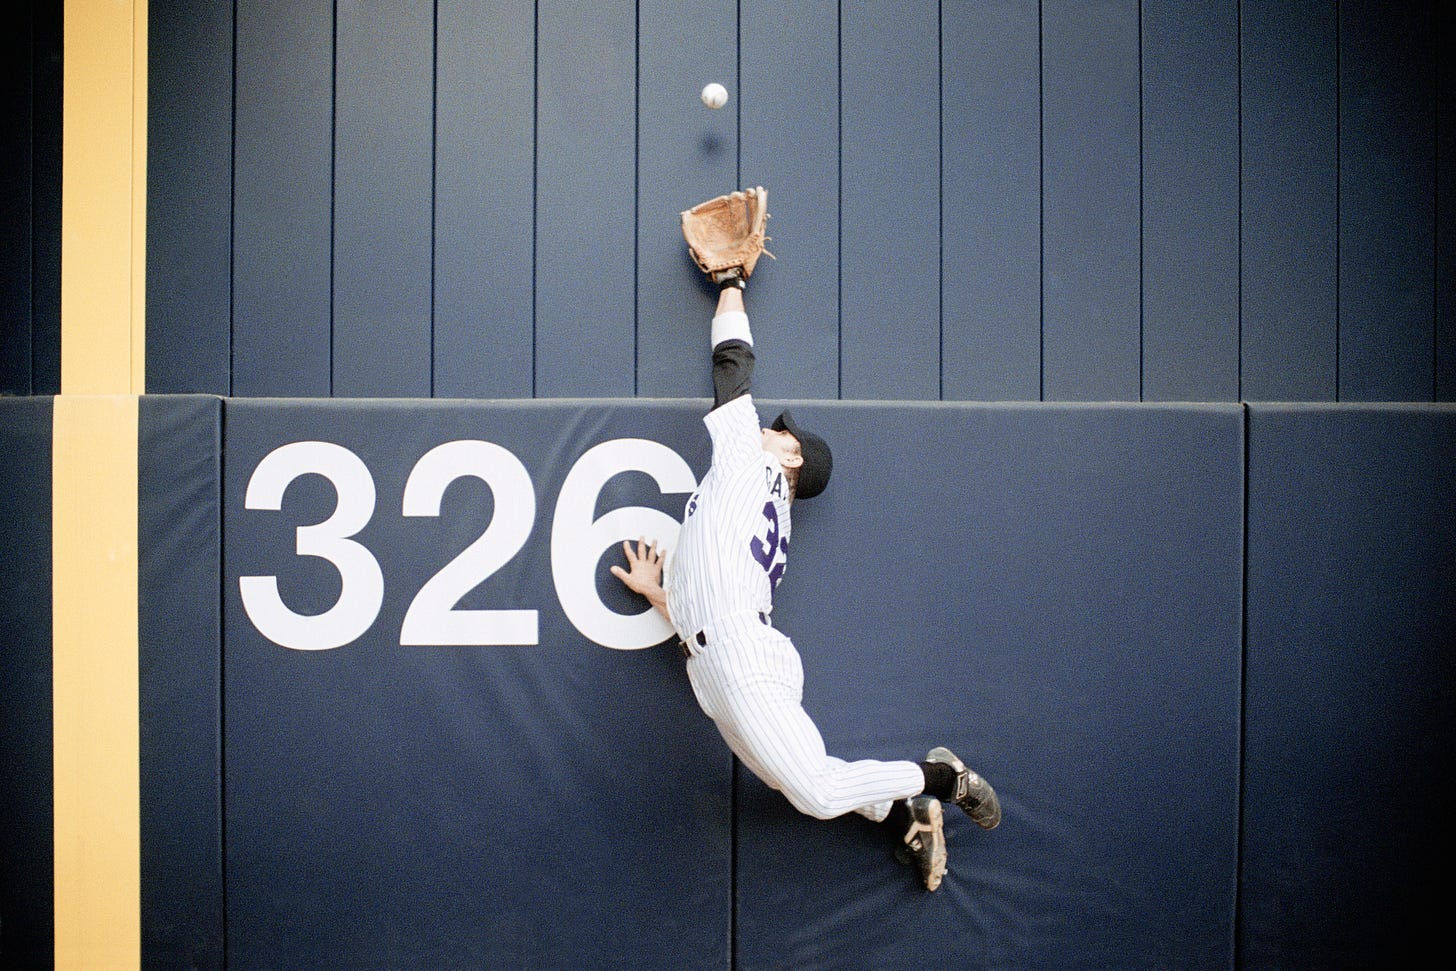 An outfielder reaches for a fly ball.